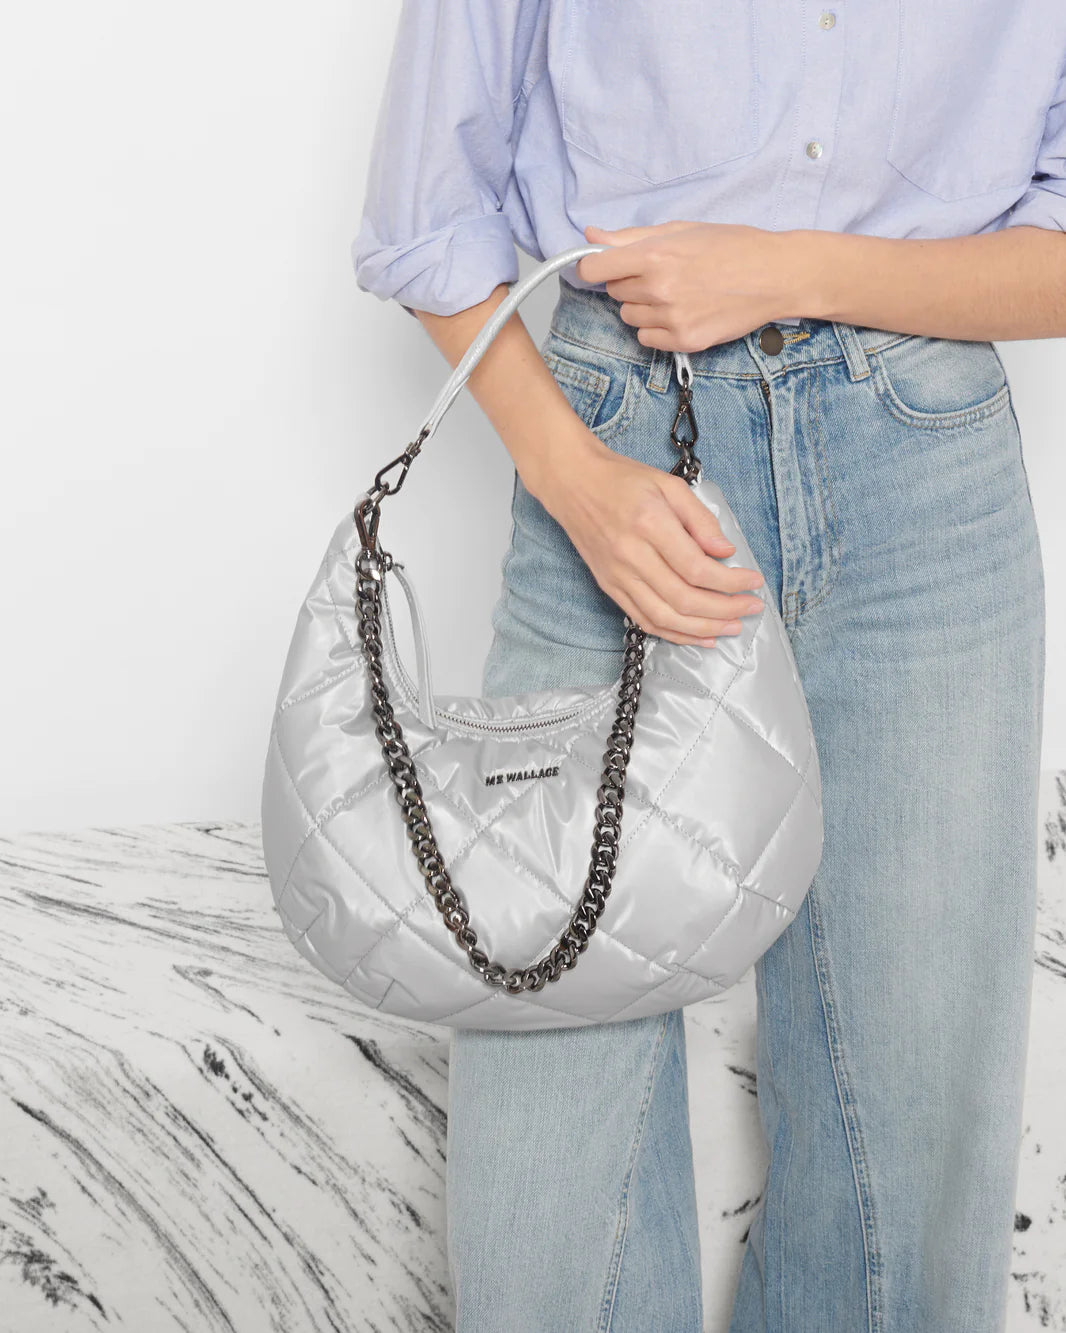 MZ WALLACE BOWERY SHOULDER BAG IN OYSTER METALLIC